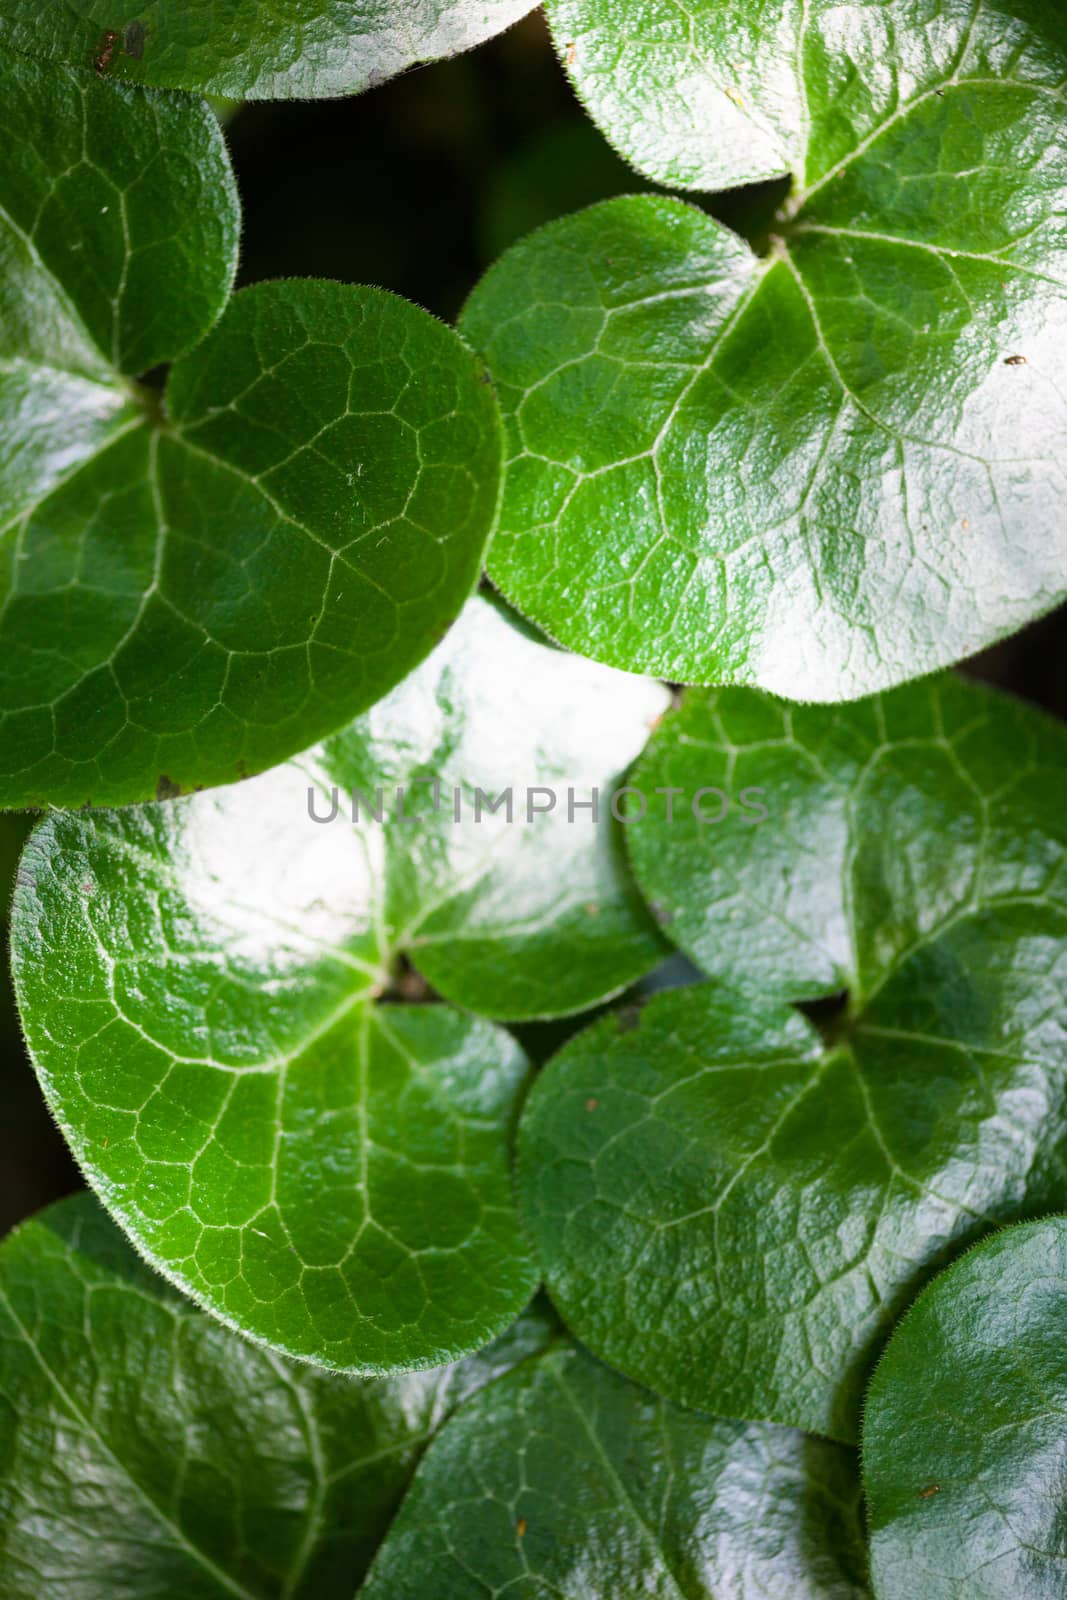 Shiny green leaves of asarabacca (Asarum europaeum) by rootstocks